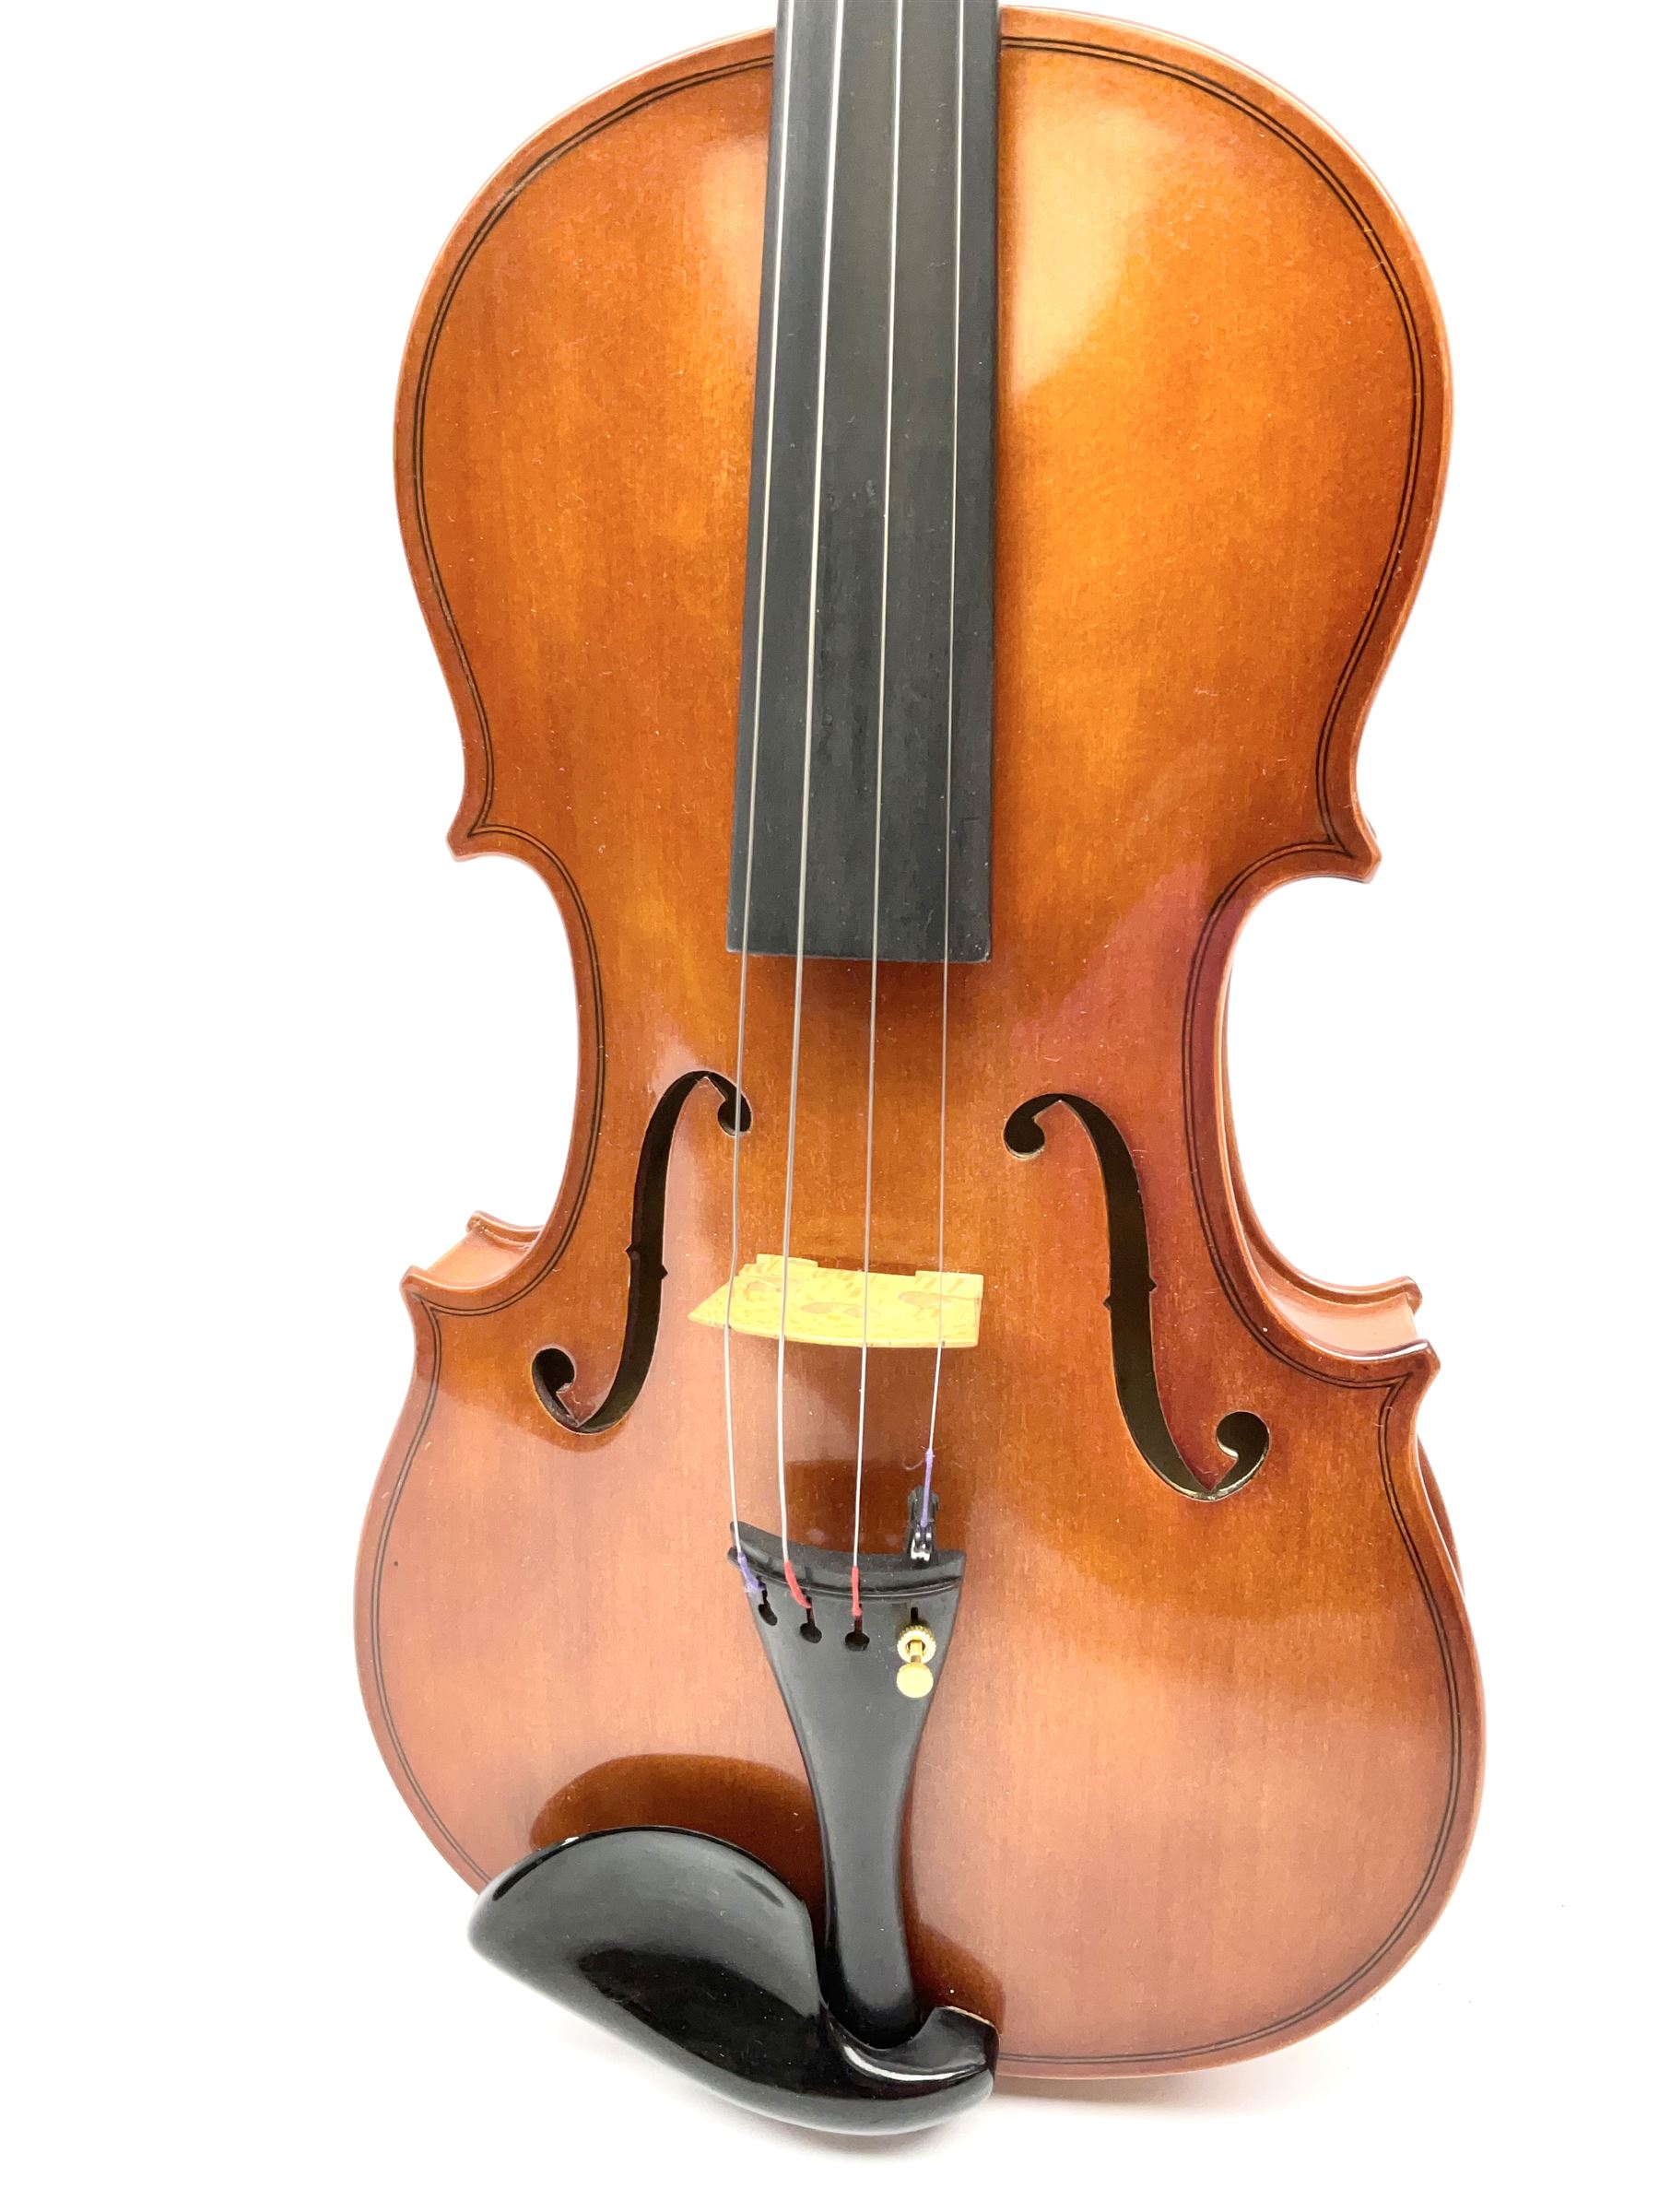 Modern violin with 36cm two-piece maple back and ribs and spruce top 60cm overall - Image 4 of 16